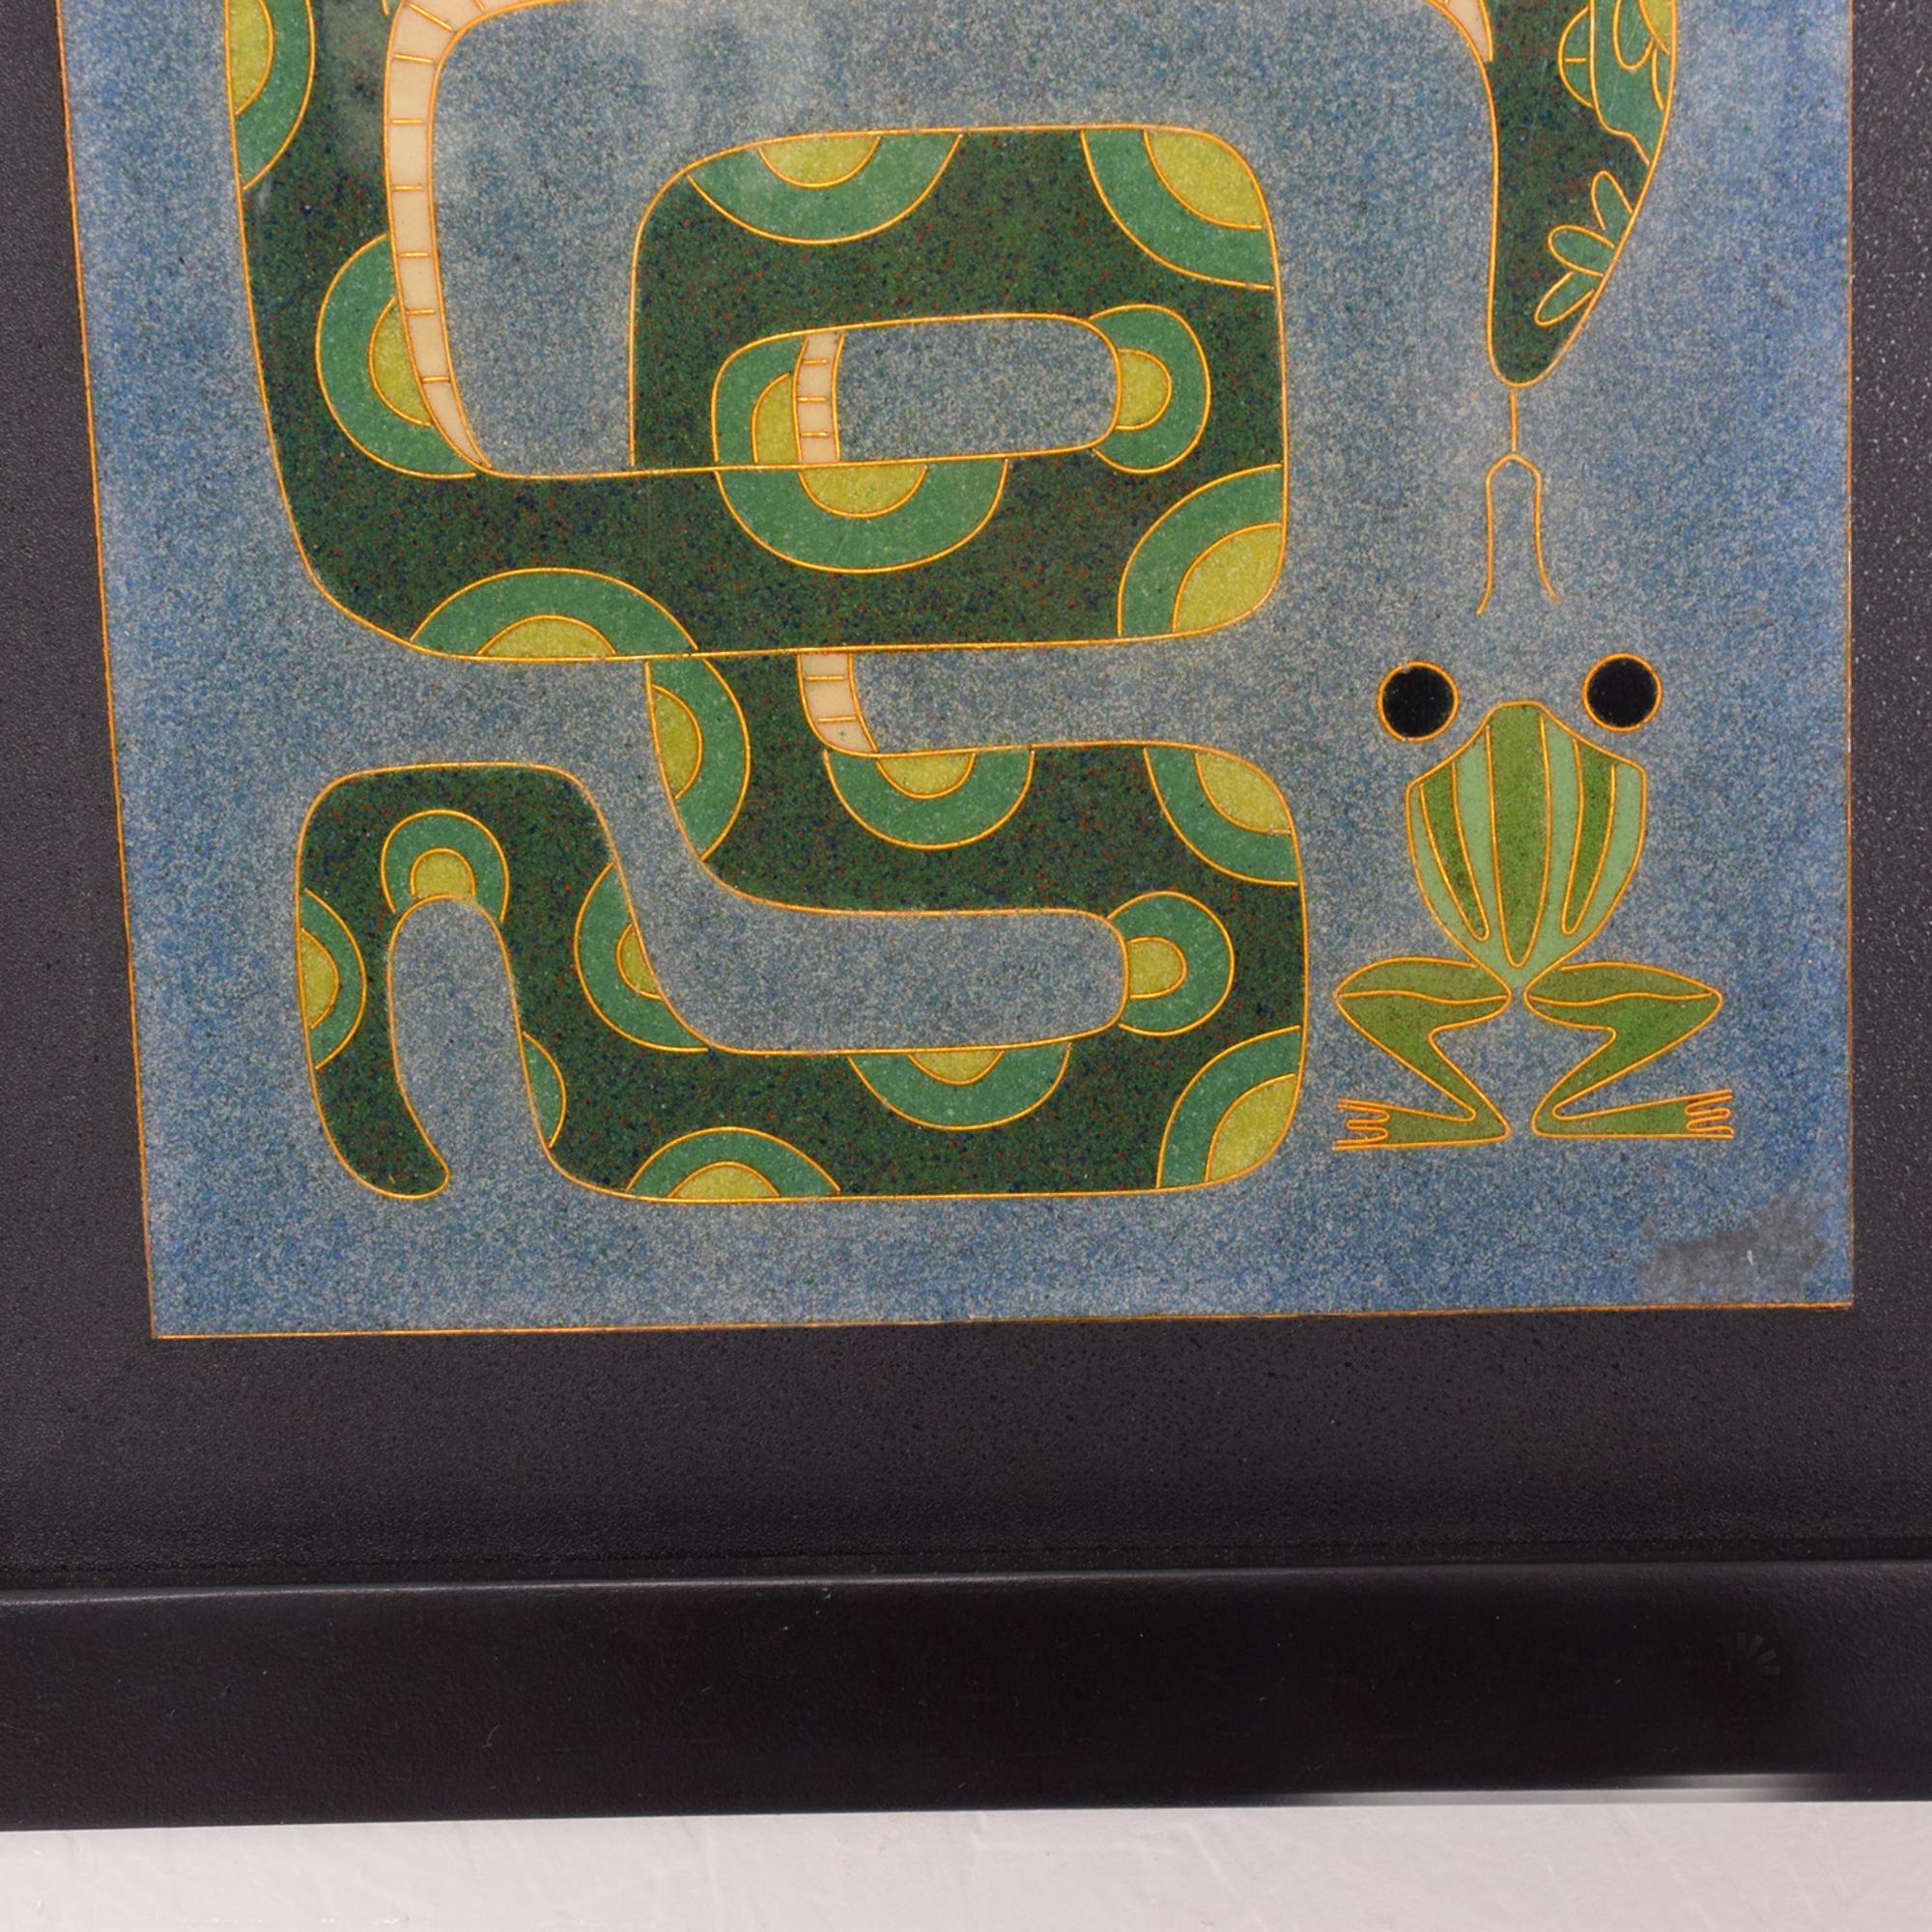 1980s modern enamel wall art work whimsical frog and snake in a soothing blue and green color modern design.  Framed Art. 
Measures: Height 10.5 in. (26.67 cm), width 10.5 in. (26.67 cm), depth 1 in. (2.54 cm)
Wear consistent with age and use. Minor